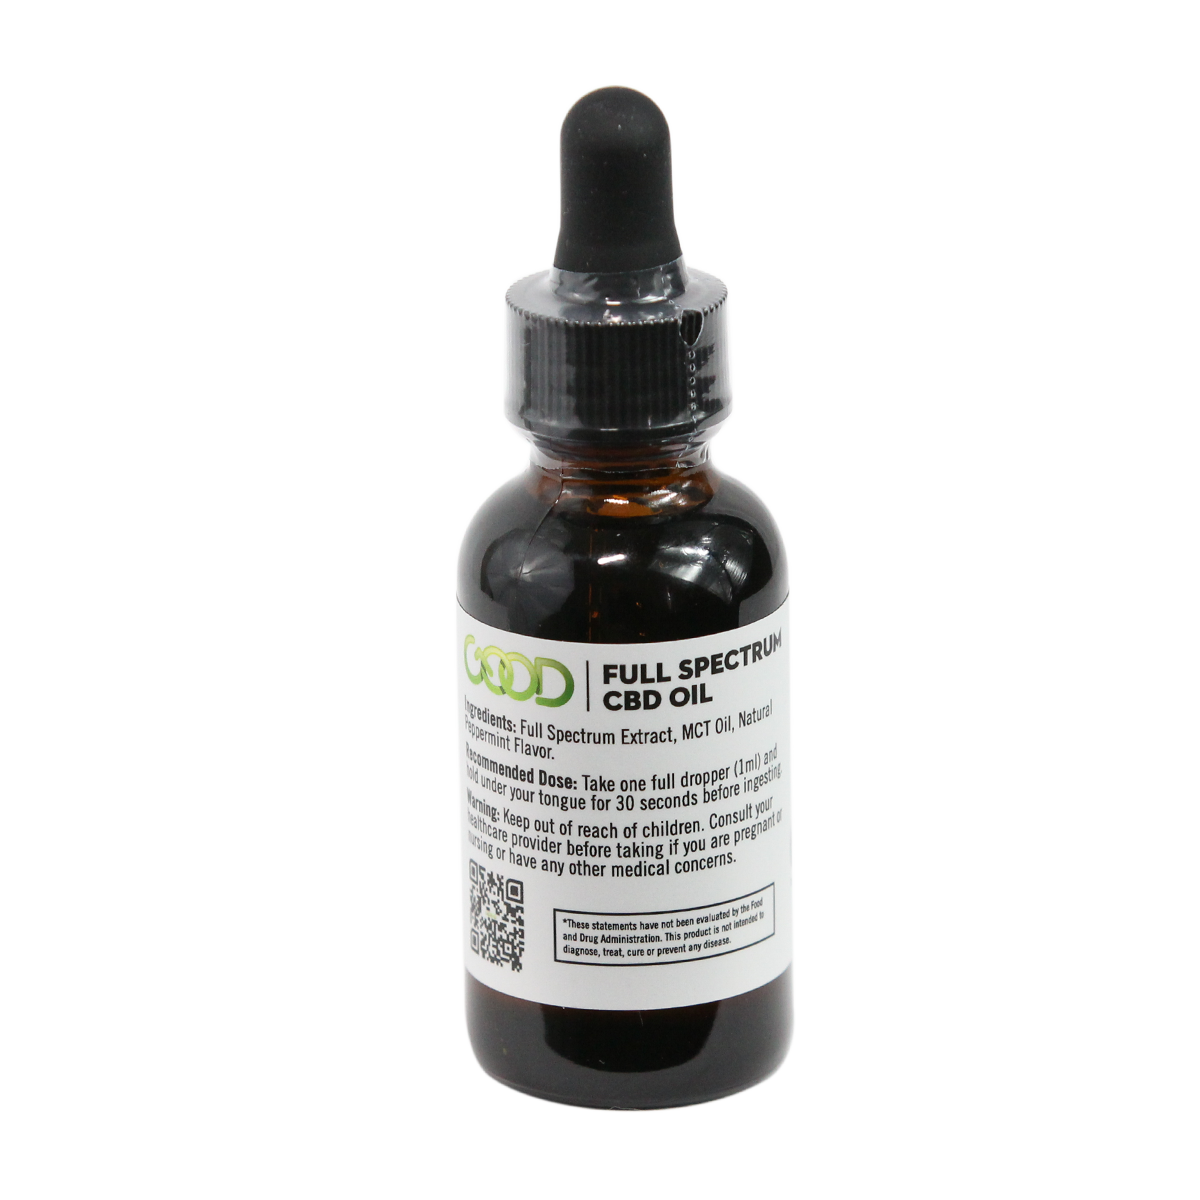 Cinnamon CBD Oil is available at GoodCBD.com.  We specialize in delta 8 carts, delta 8 gummies, delta 8 oil, and delta 8 flower.  Our website carries brands such as: 3CHI, Good CBD, Urb, Injoy Extracts, AiroPro, Delta Effex, and more.  Free shipping on orders $50.00 or more.